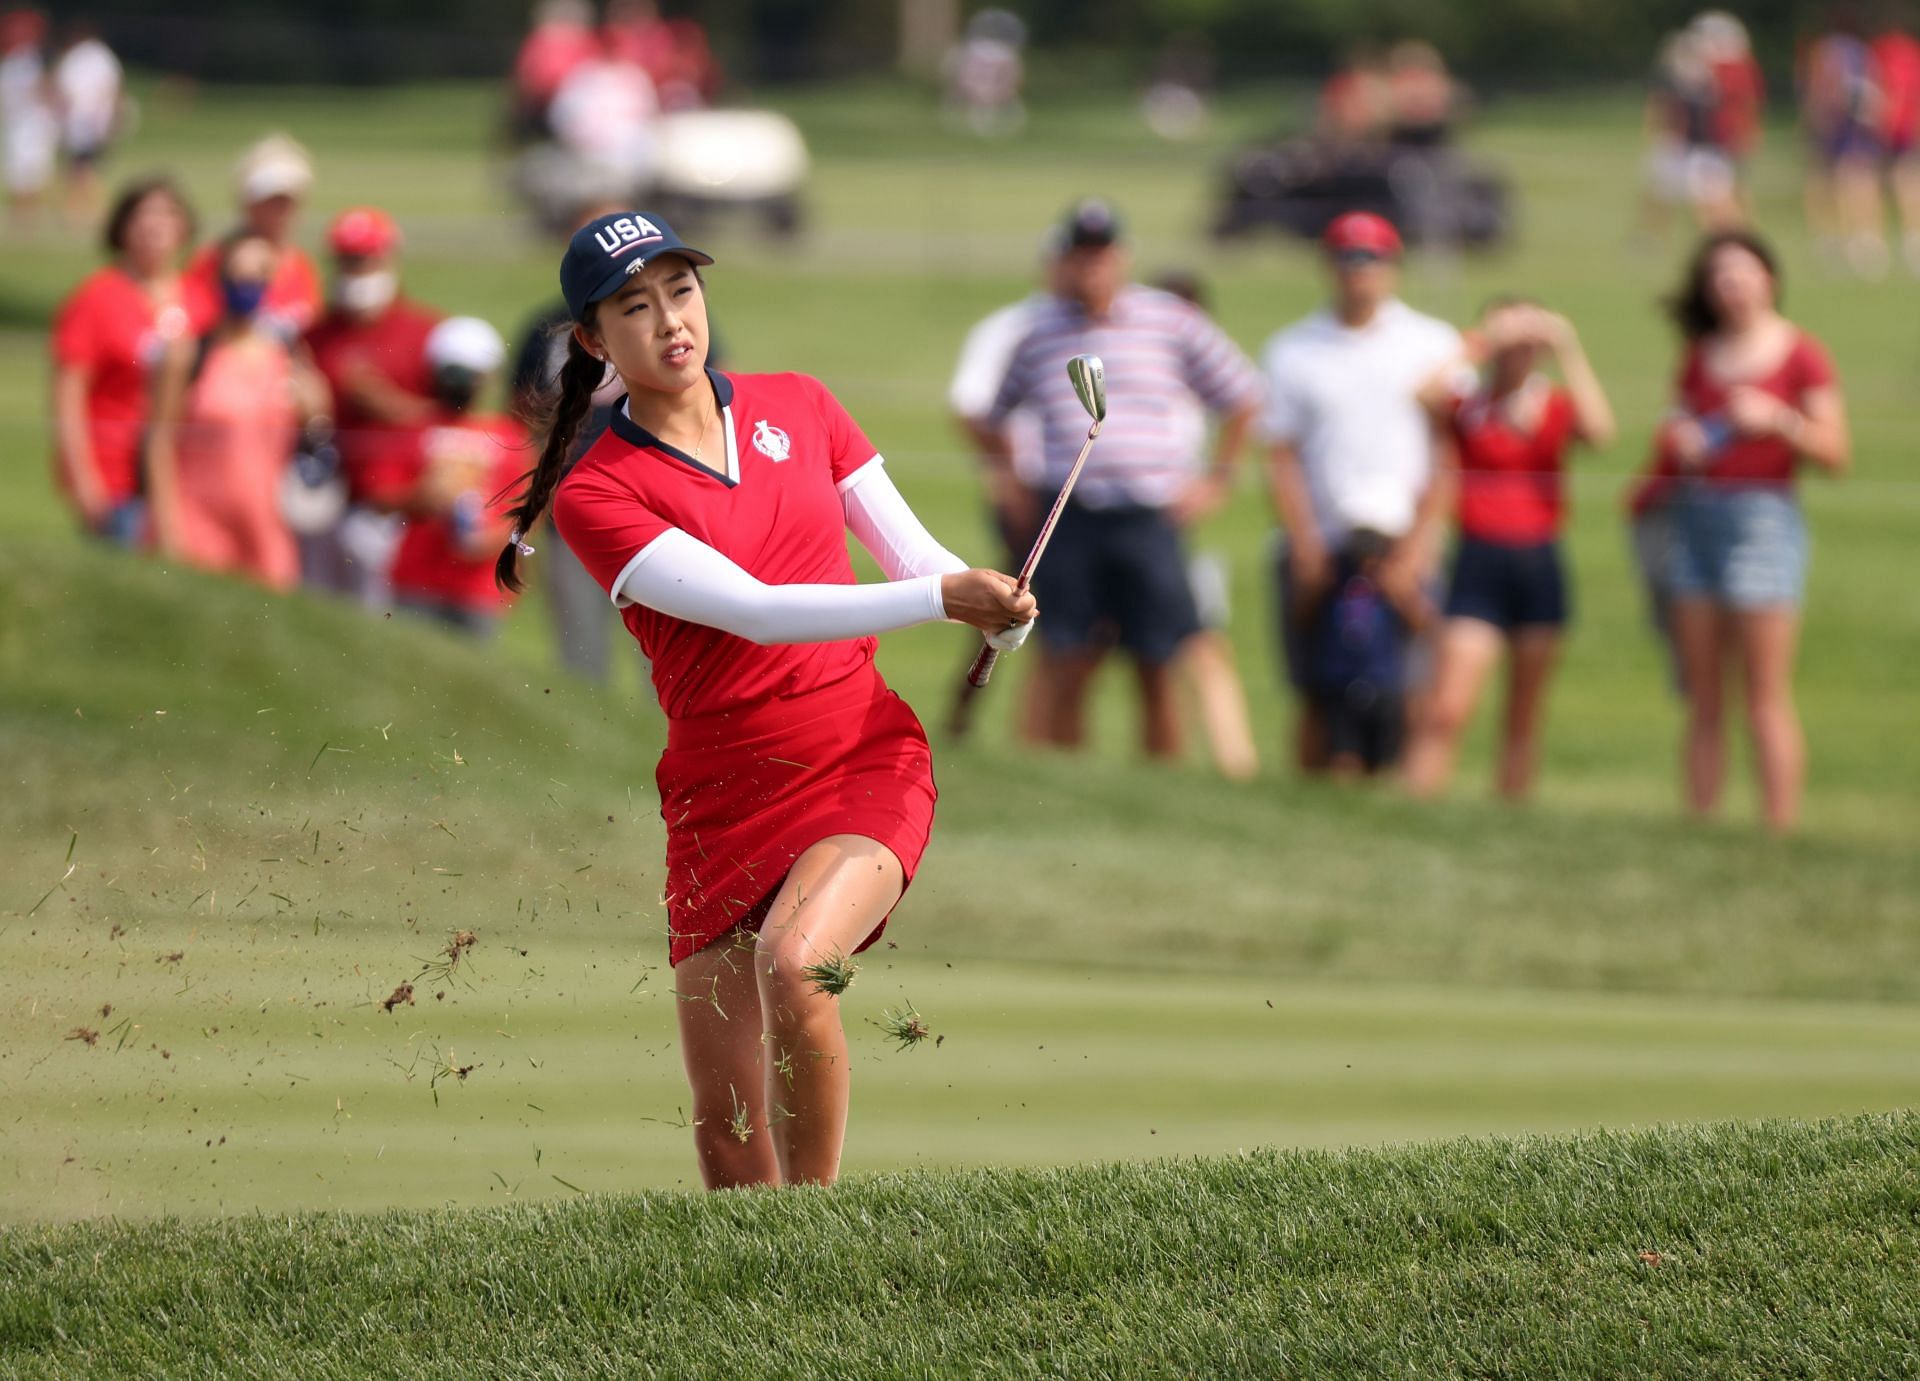 Yealimi Noh at the 2021 Solheim Cup (image via Getty)